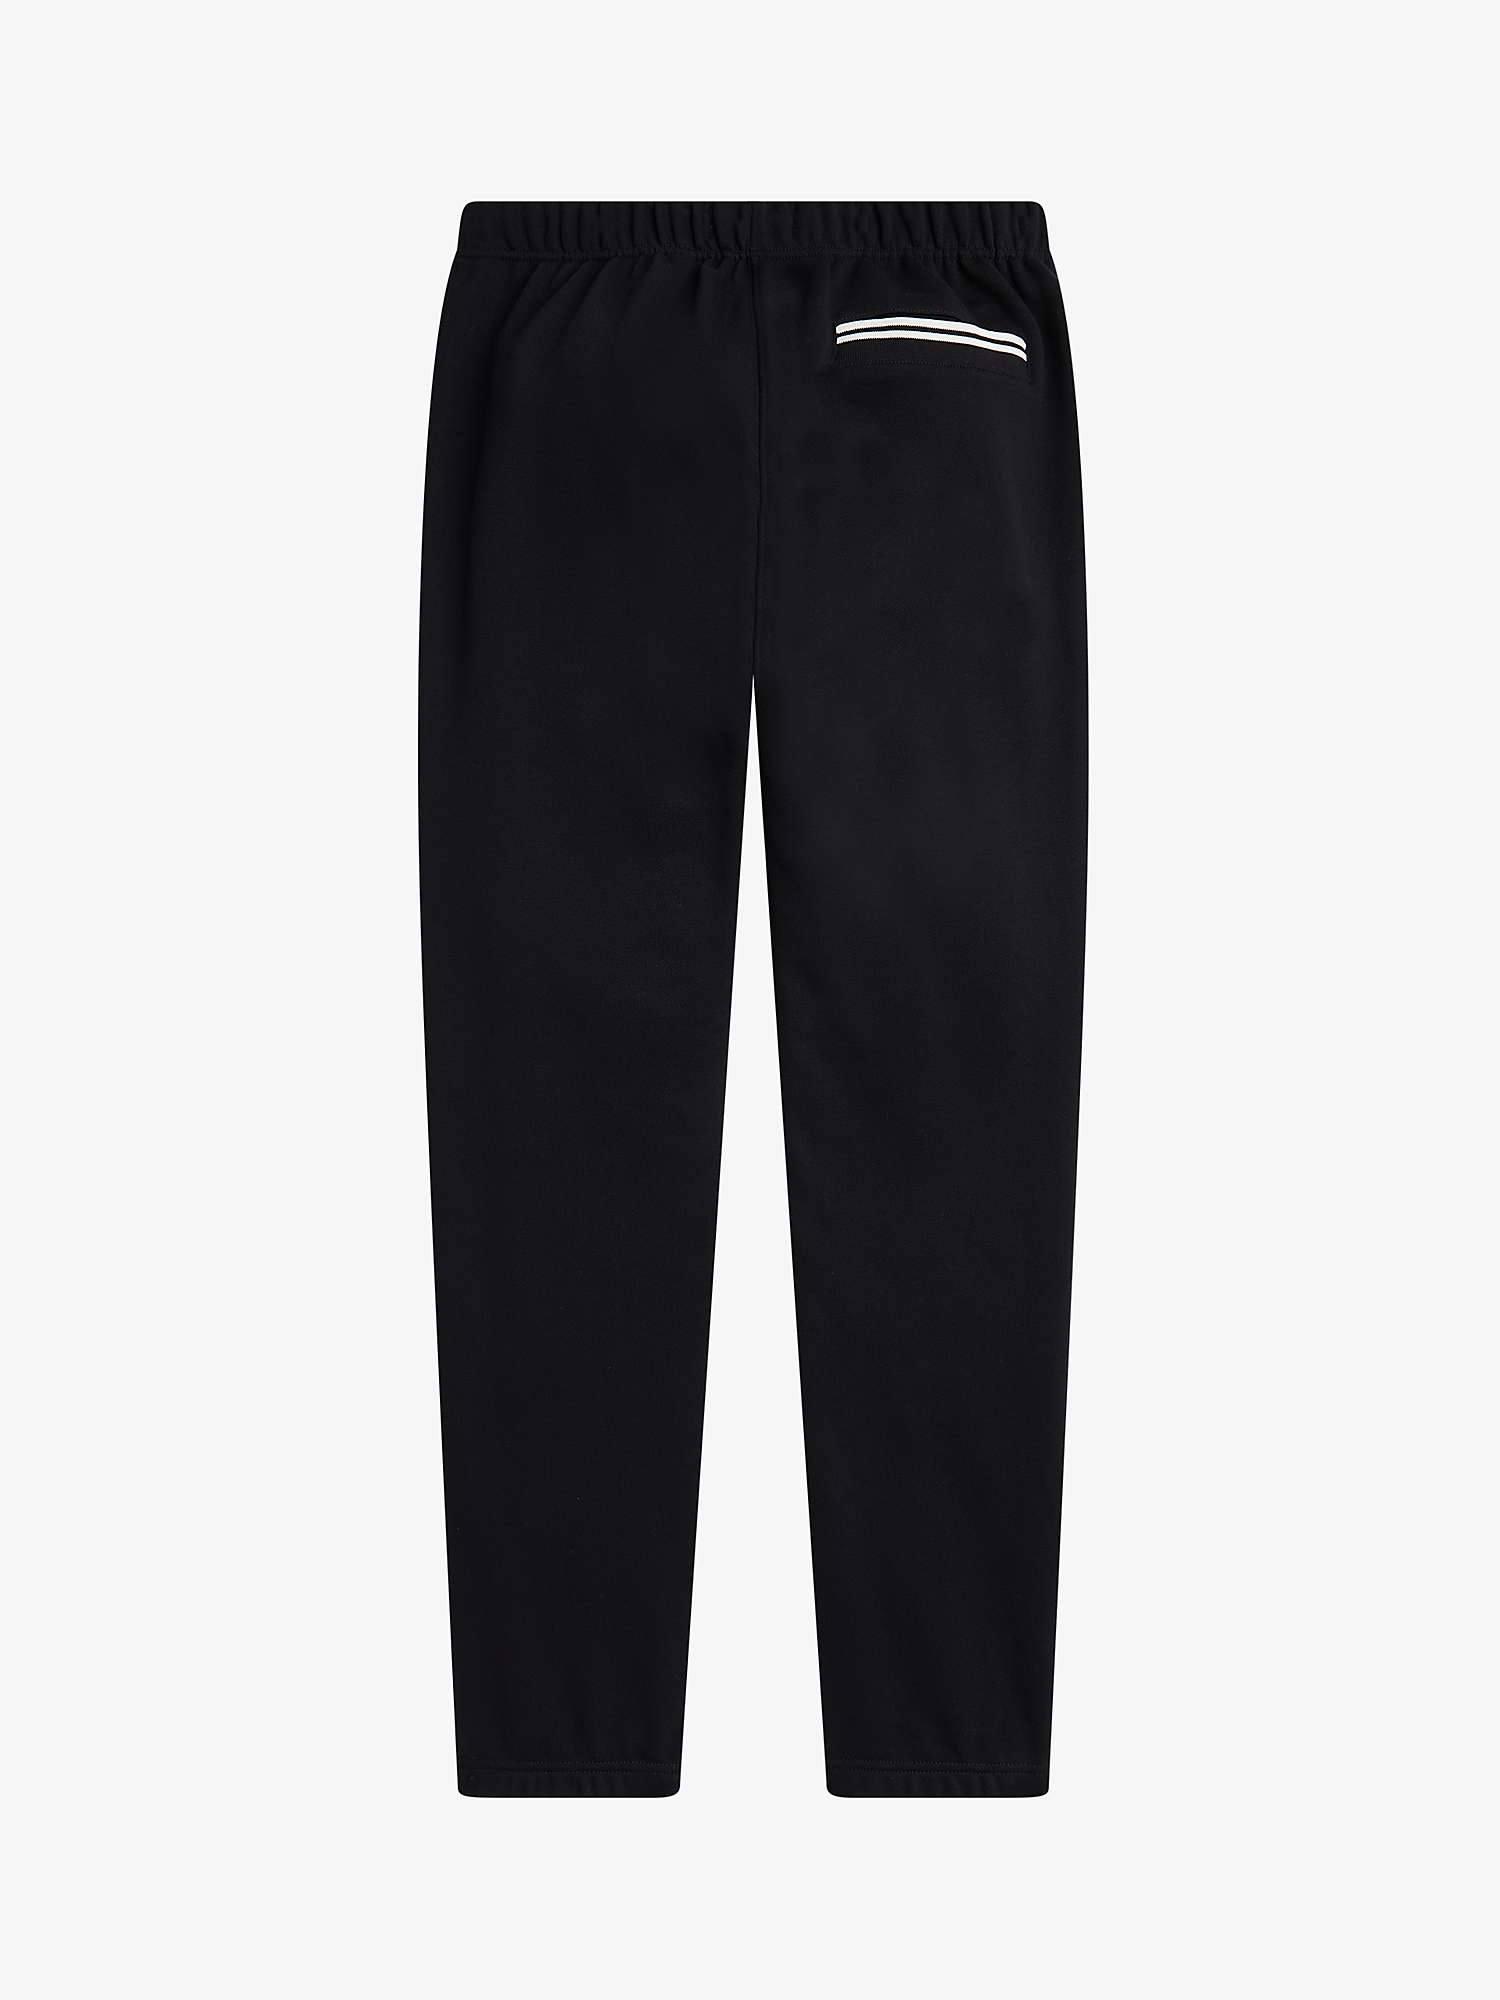 Buy Fred Perry New Loopback Joggers Online at johnlewis.com